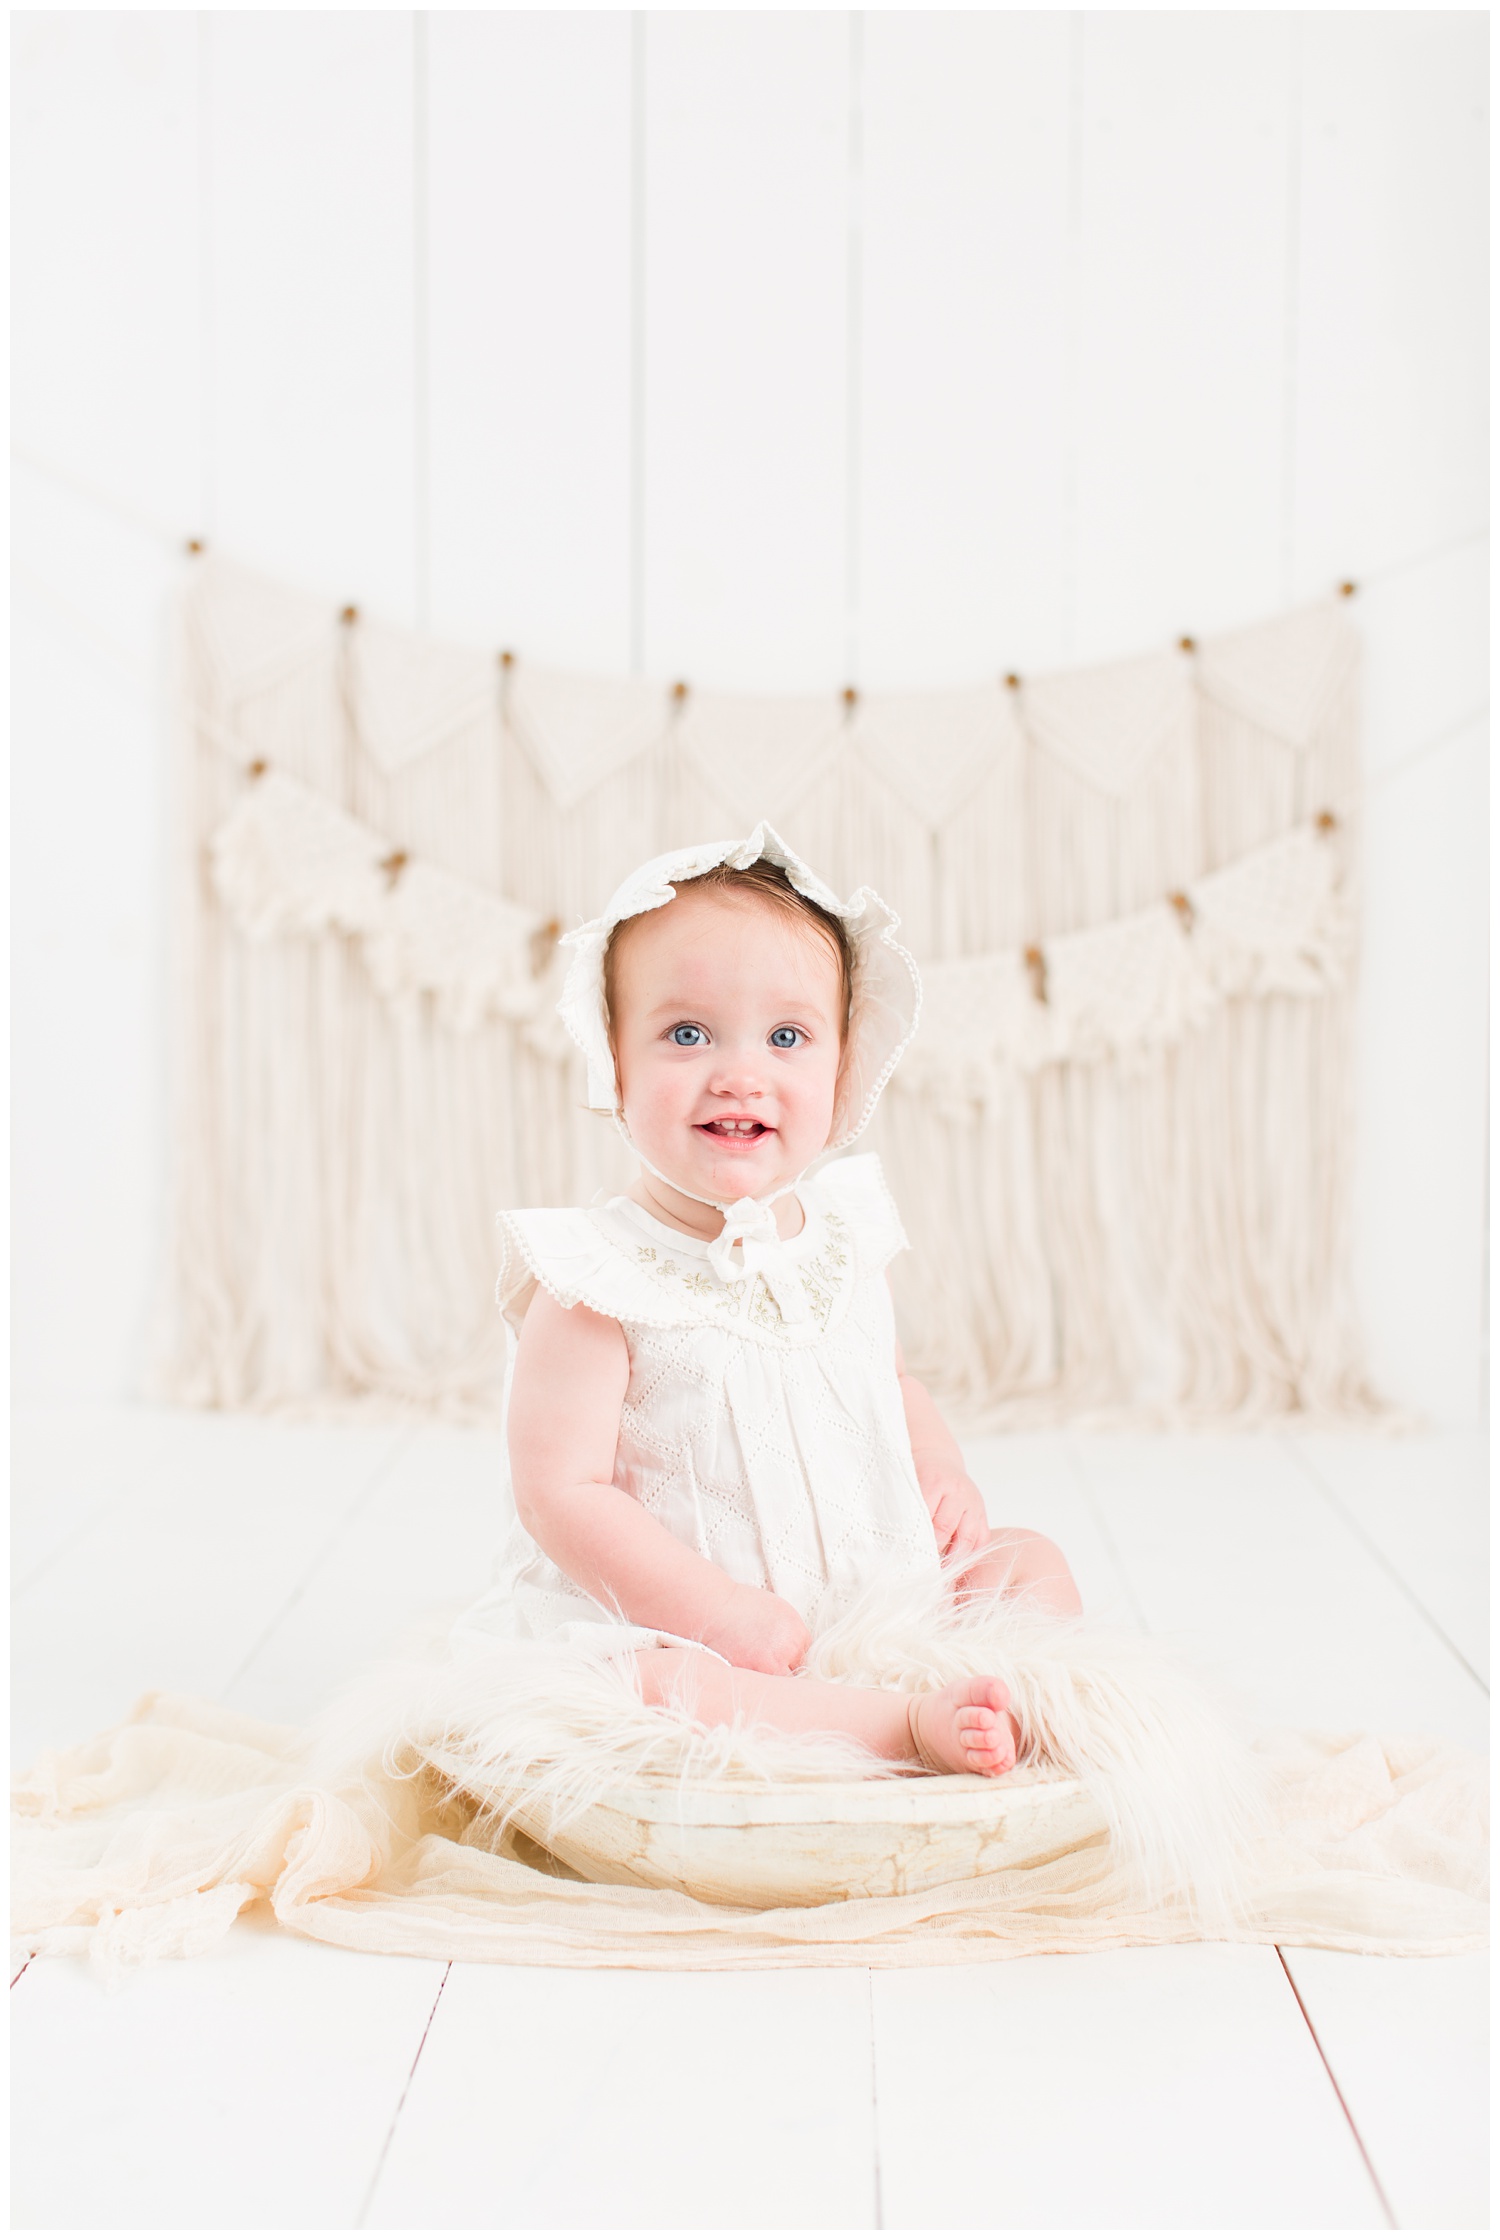 Baby Cara dressed in a vintage white romper and bonnet sitting in a rustic cream bowl with a boho macrame background | CB Studio